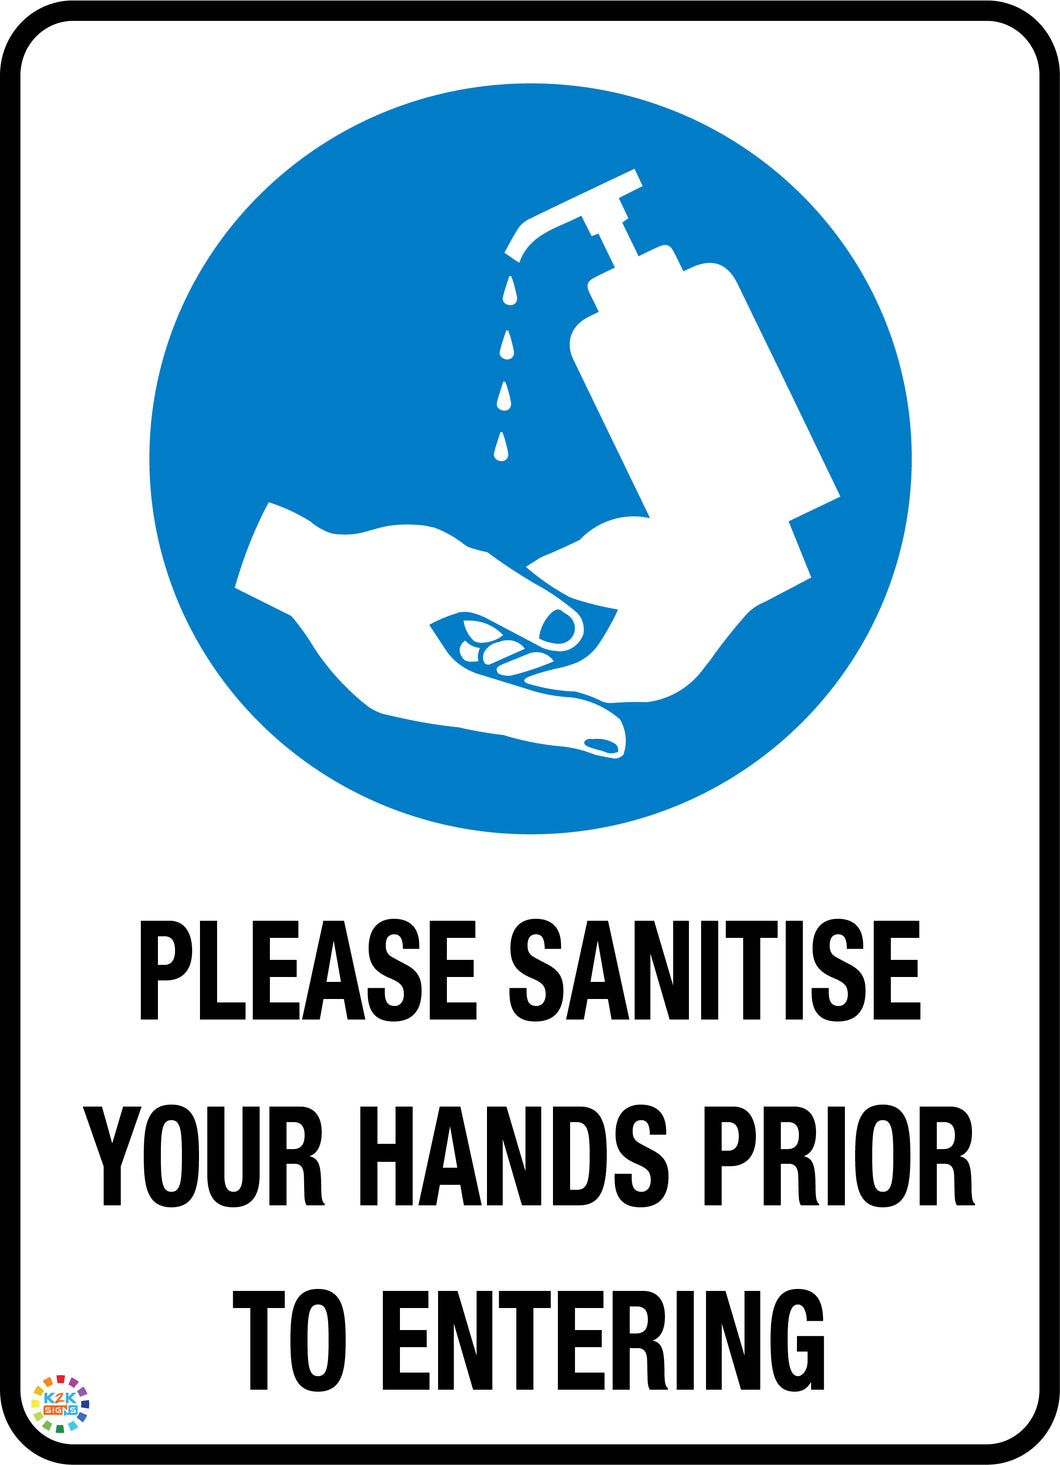 Please Sanitise Your Hands Prior To Entering sign